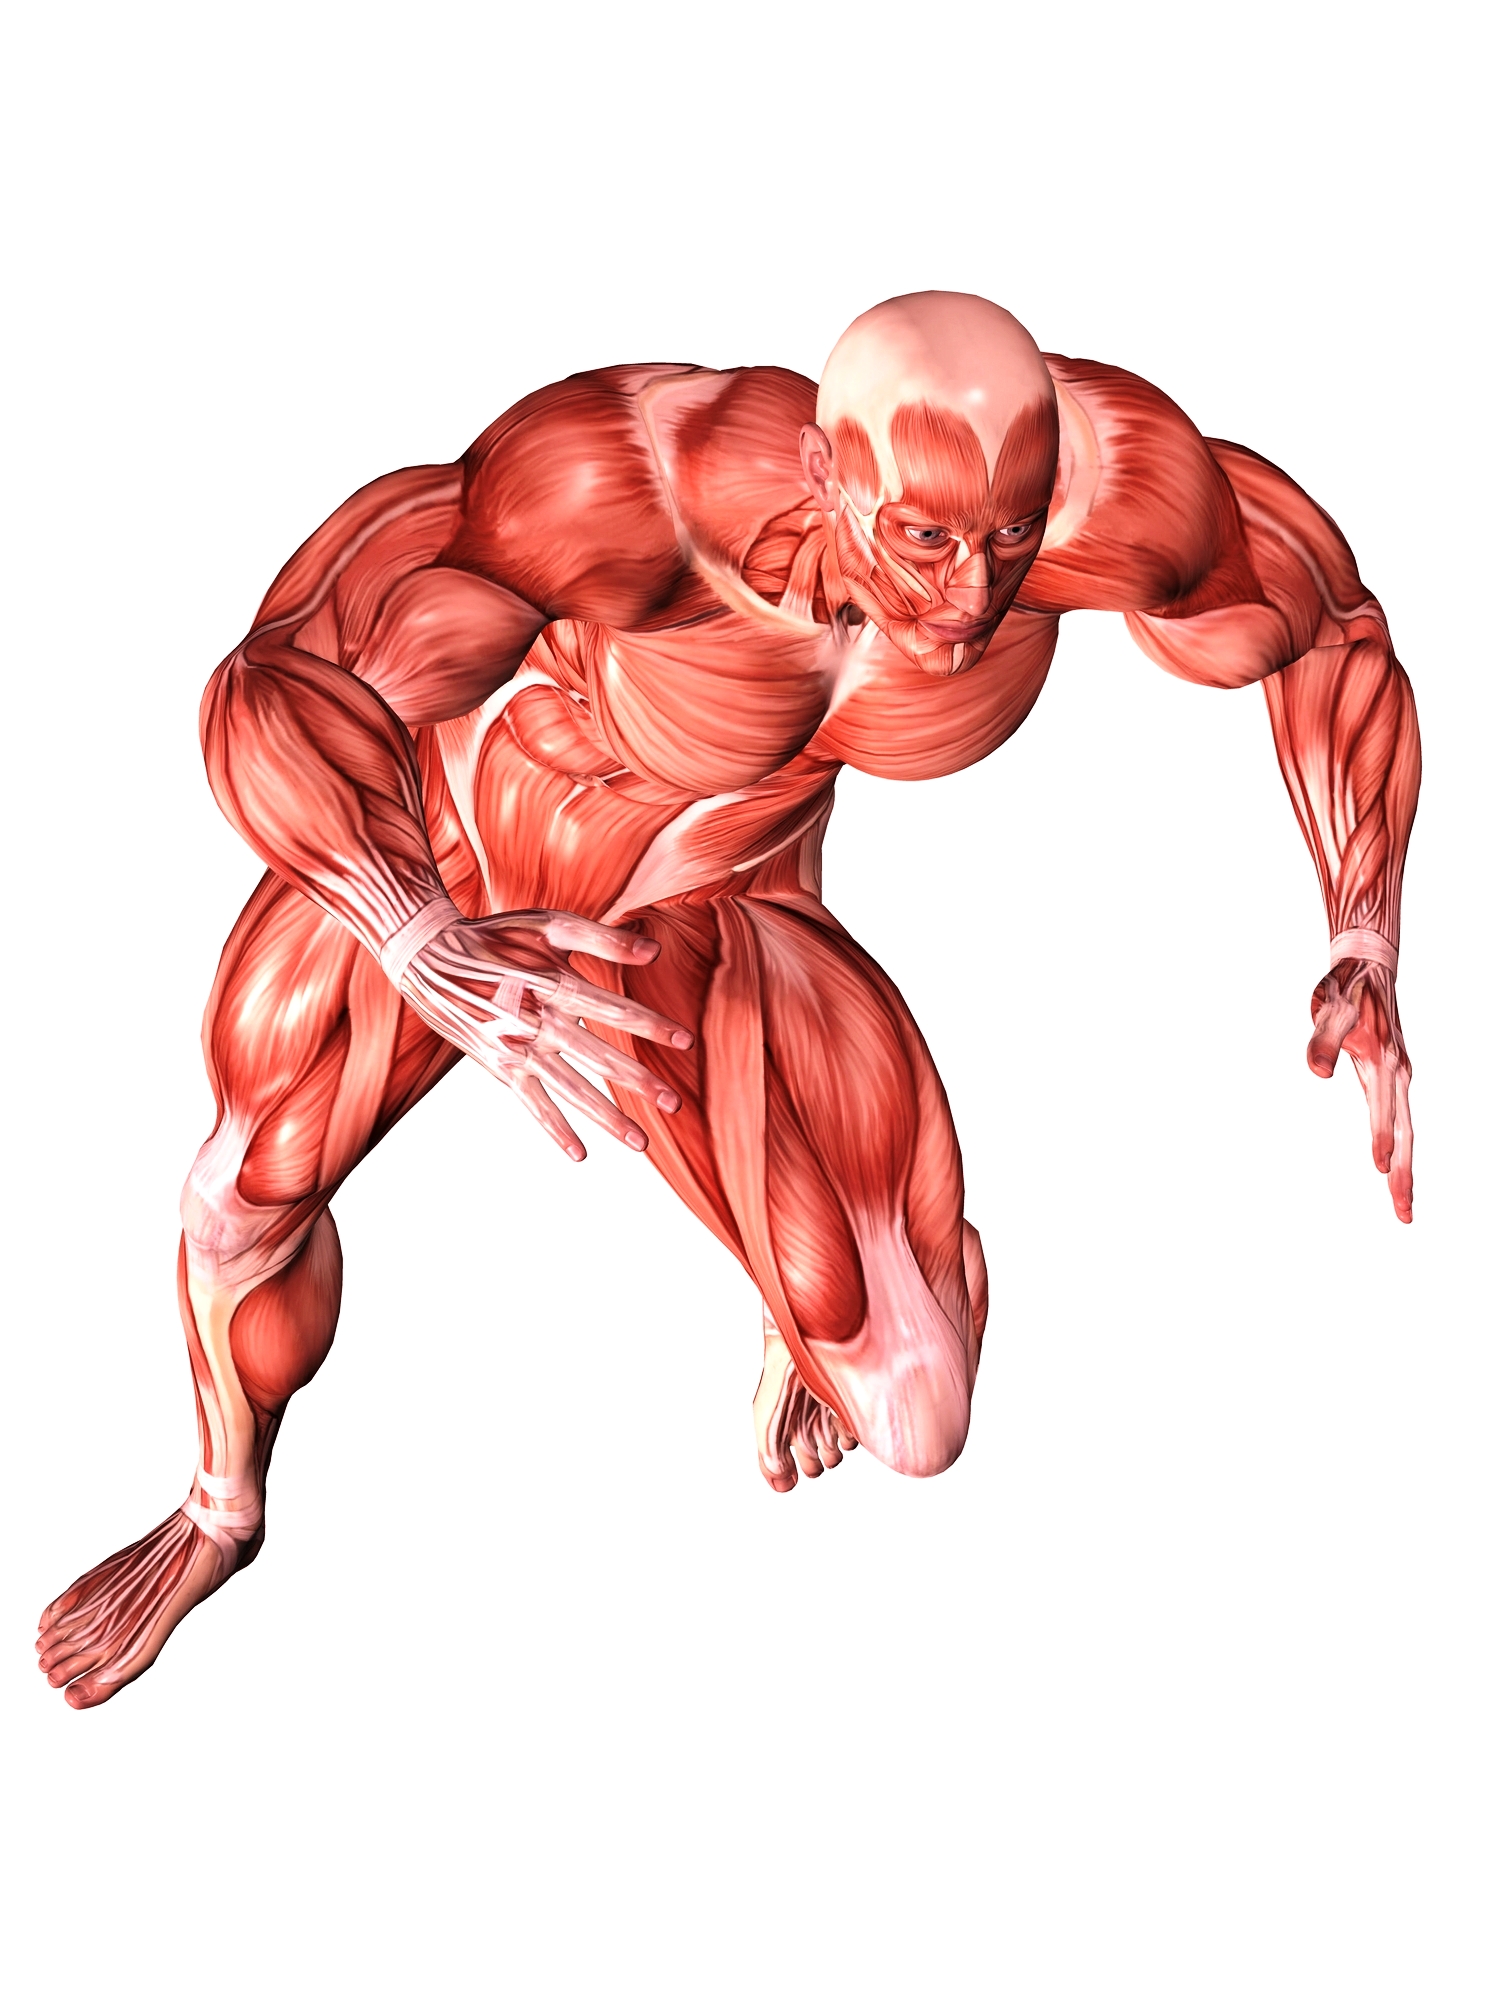 Muscular System Anatomy And Physiology Modernheal Com